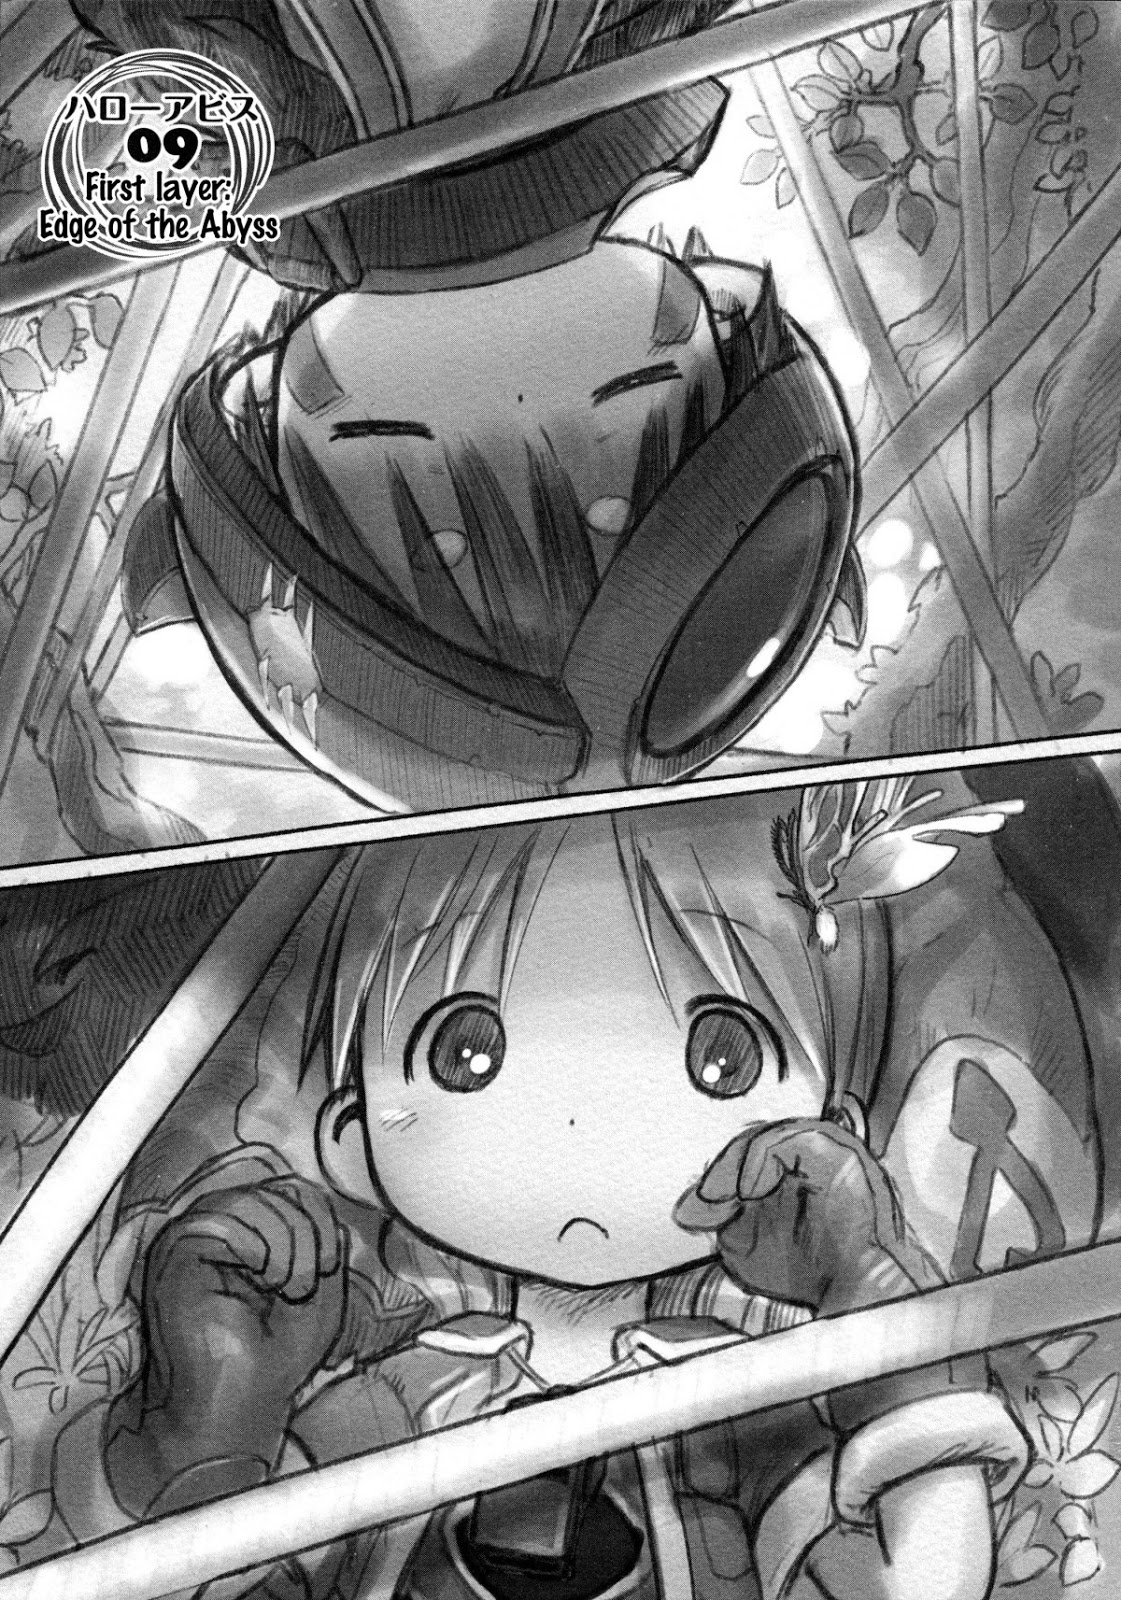 Made in Abyss Manga Chapter 9 English Online In High Quality